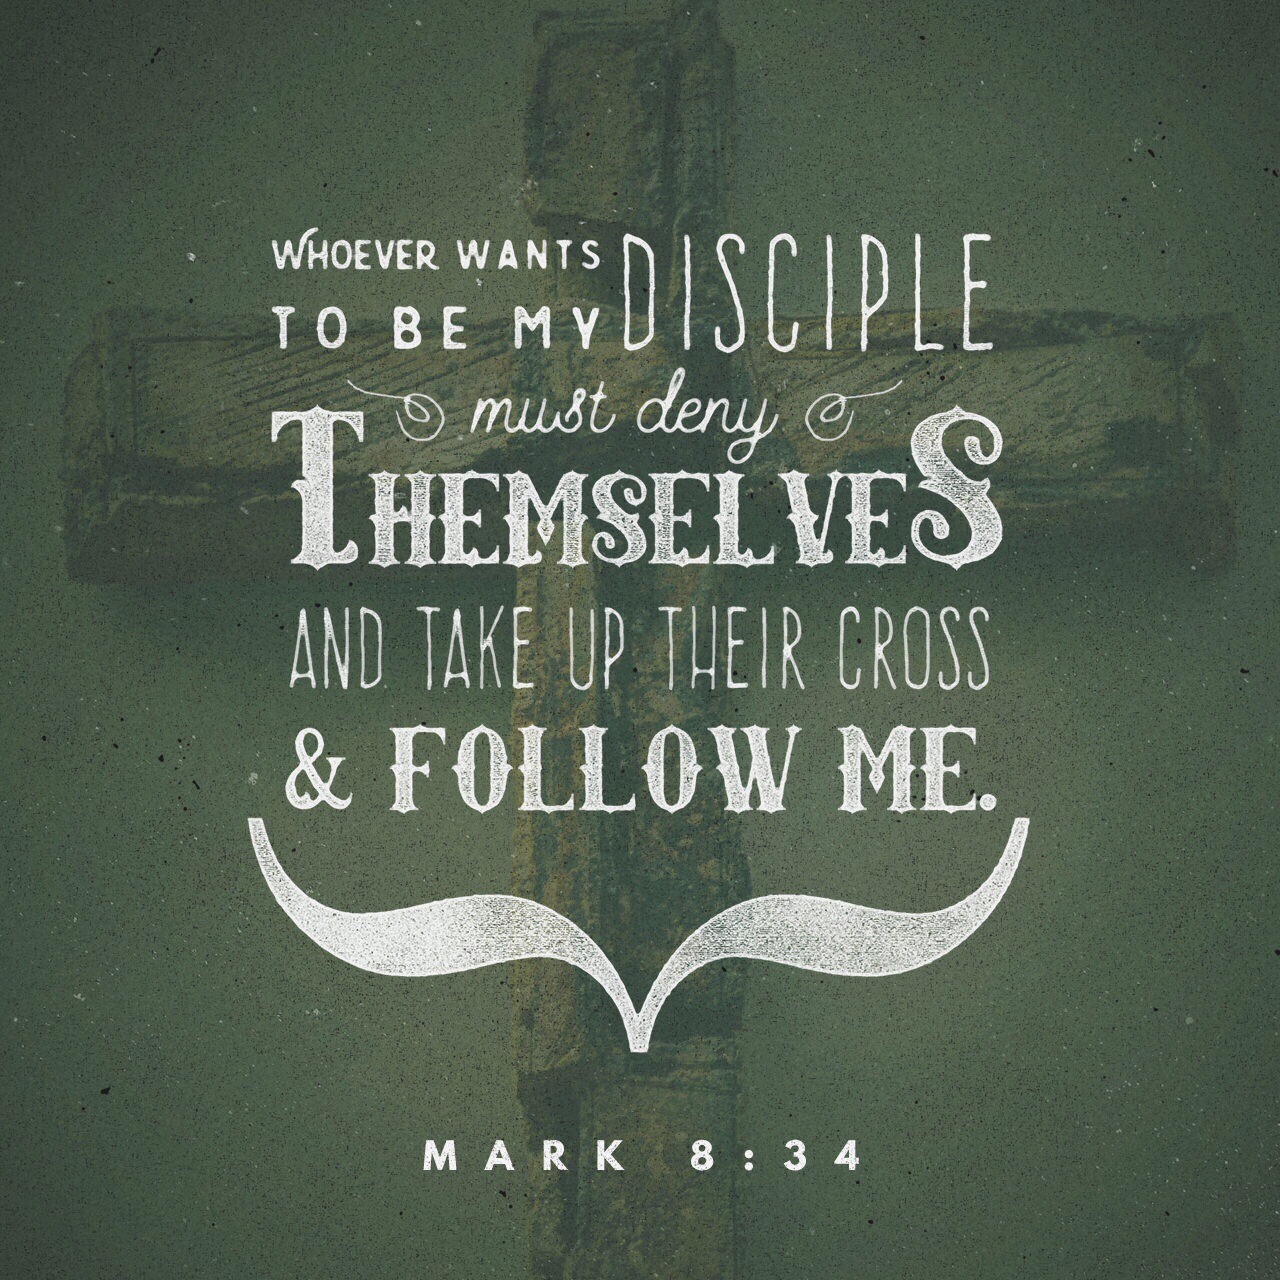 VOTD June 25, 2019  “And He summoned the crowd with His disciples, and said to them, “If anyone wishes to come after Me, he must deny himself, and take up his cross and follow Me.” ‭‭MARK‬ ‭8:34‬ ‭NASB‬‬